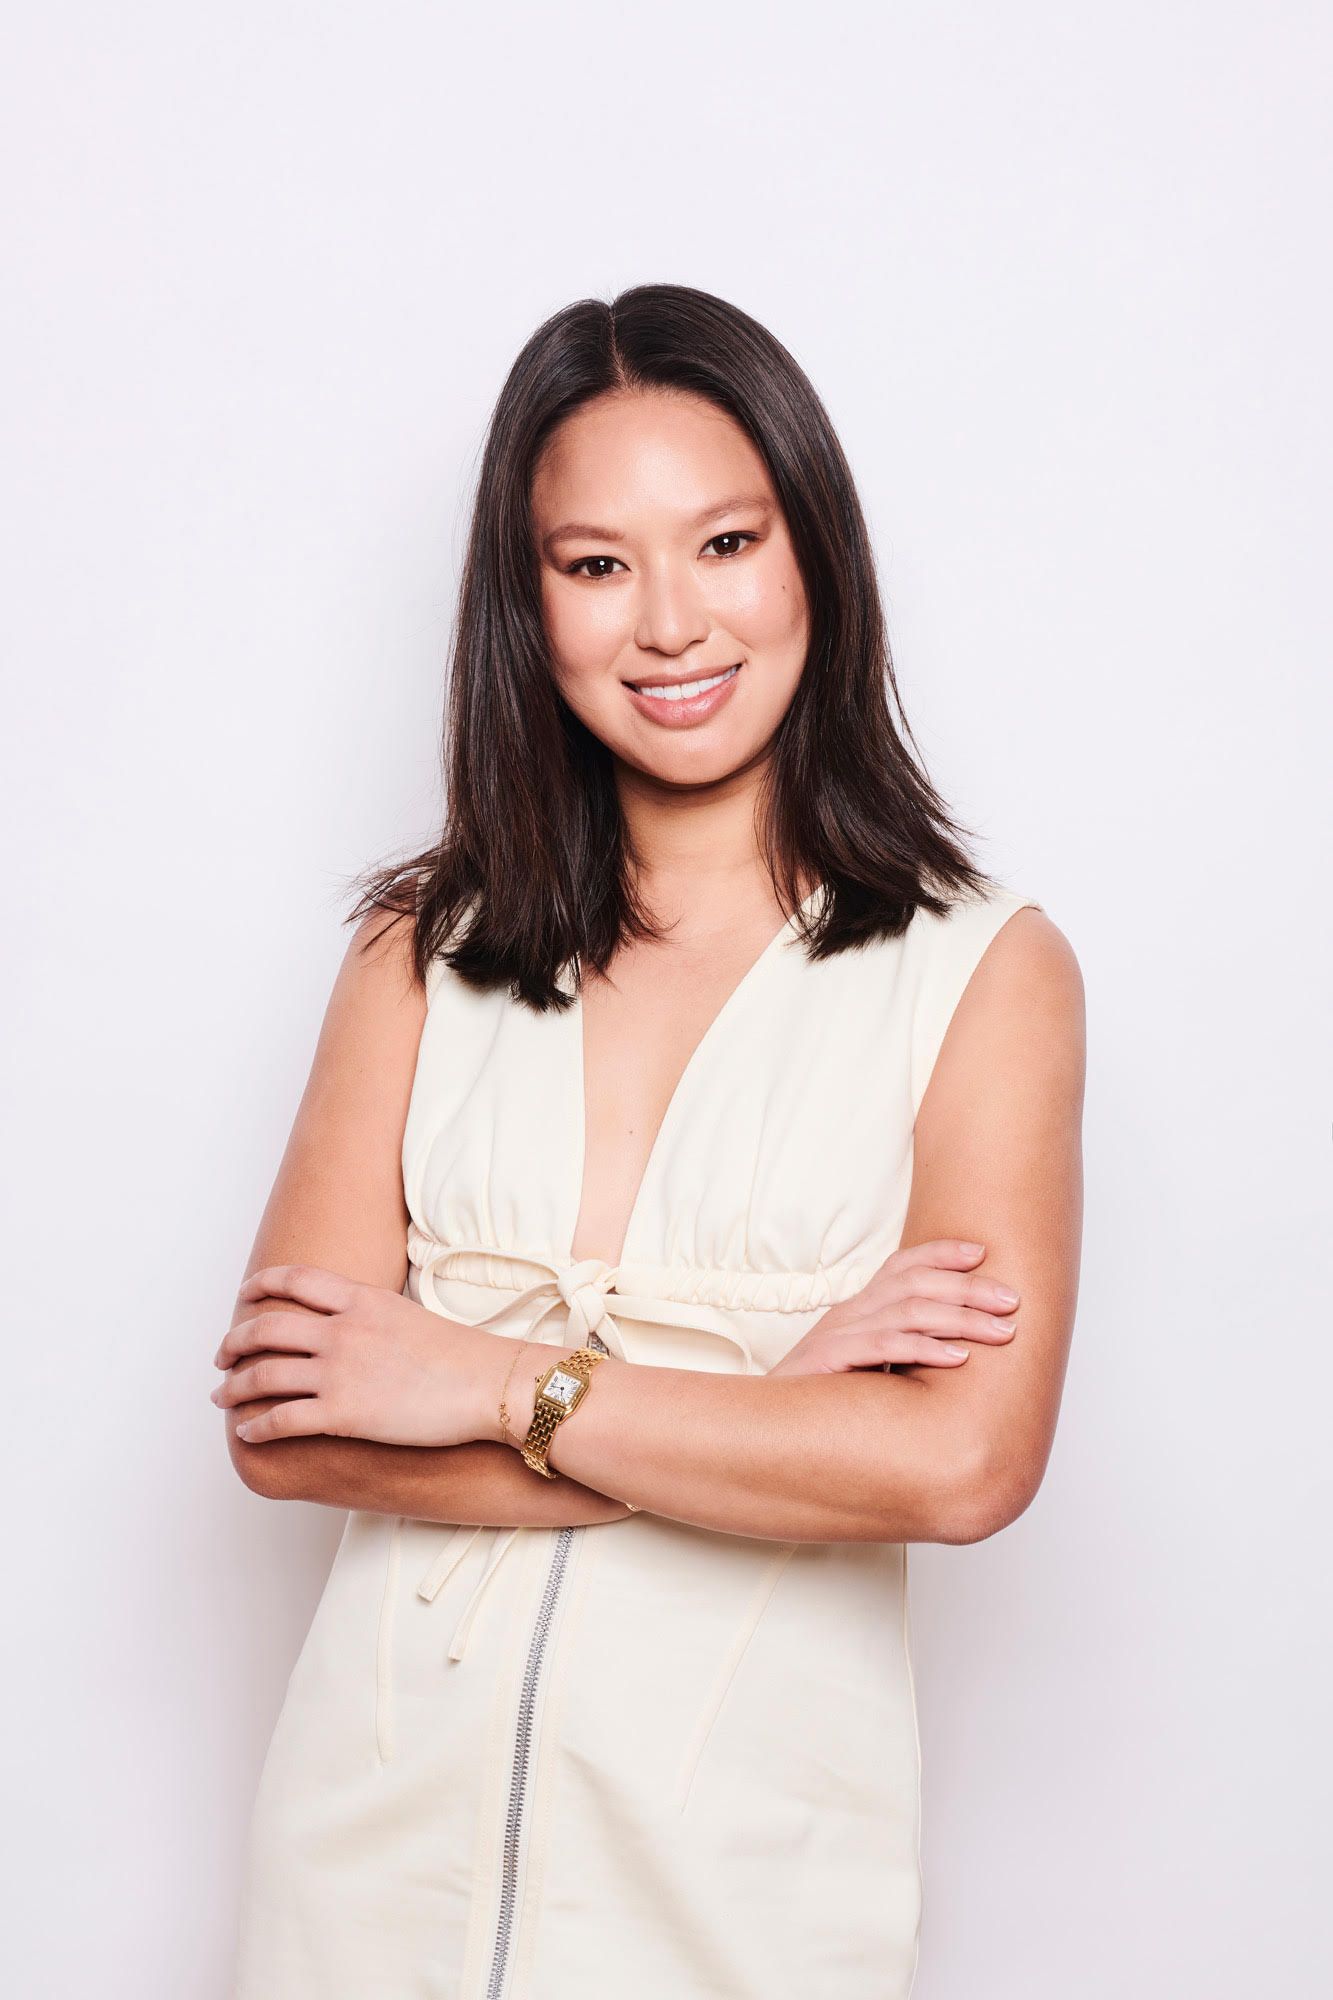 Meet | Alyce Tran, co-founder of In The Roundhouse